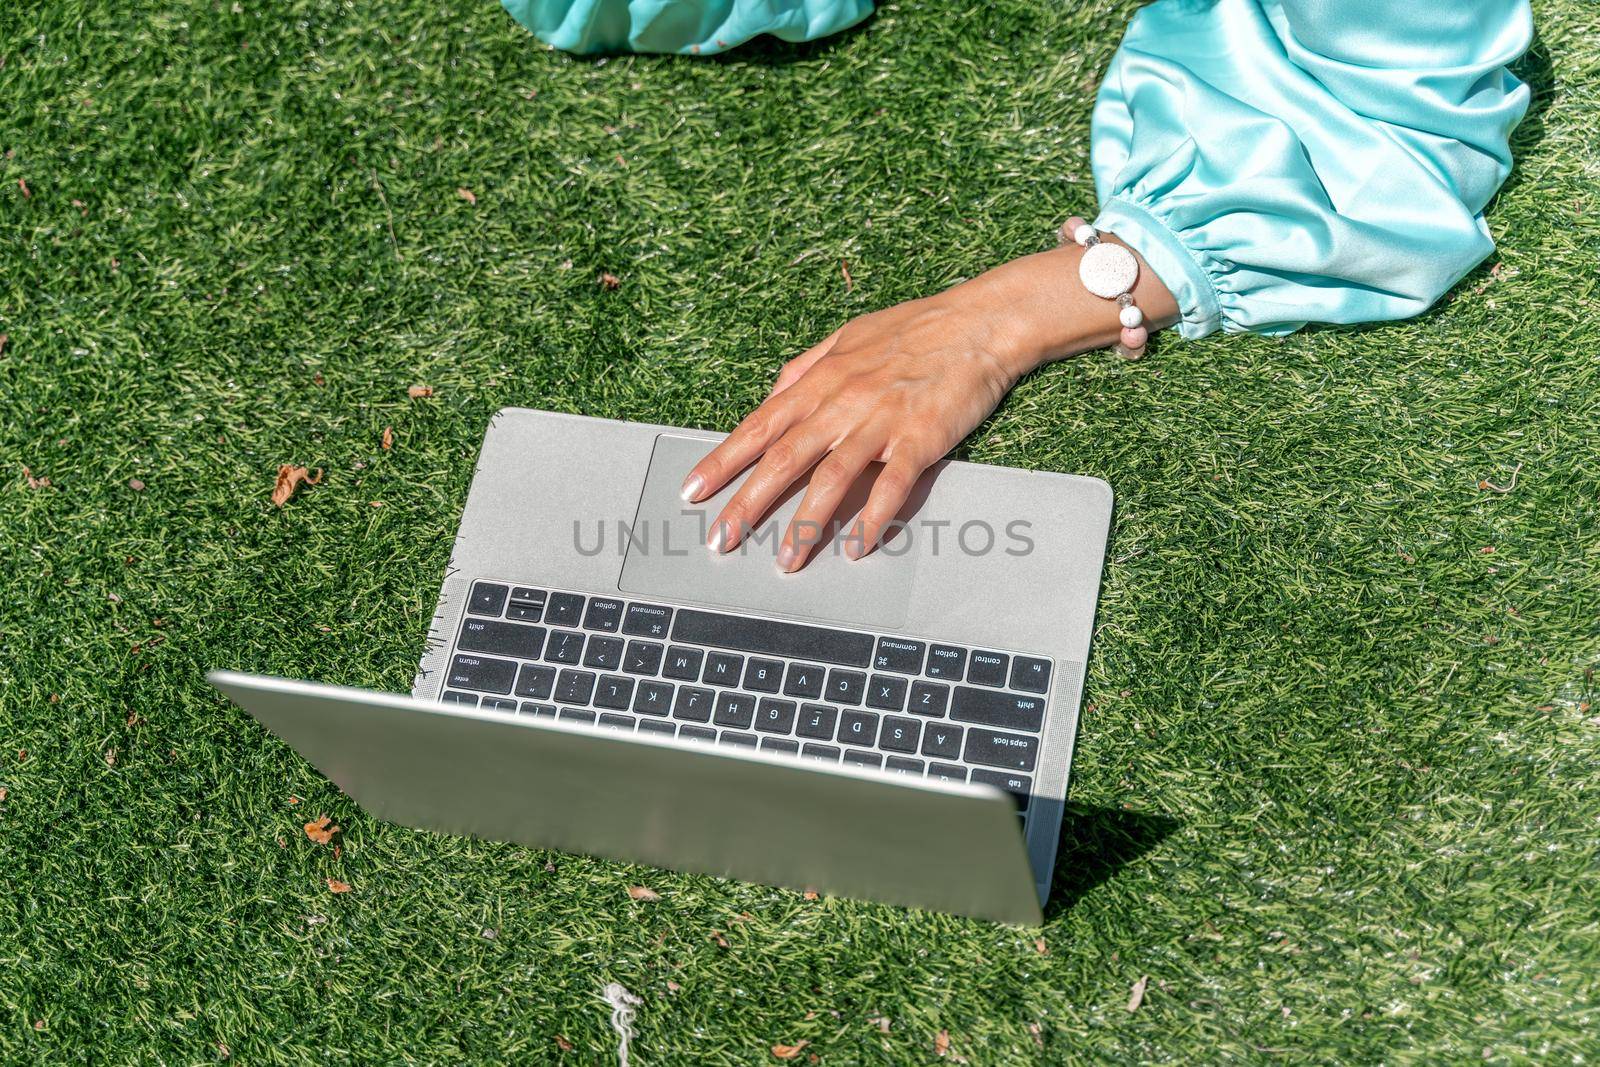 a young beautiful woman with blond curly hair in glasses and a blue dress sits on the grass in nature and uses a laptop